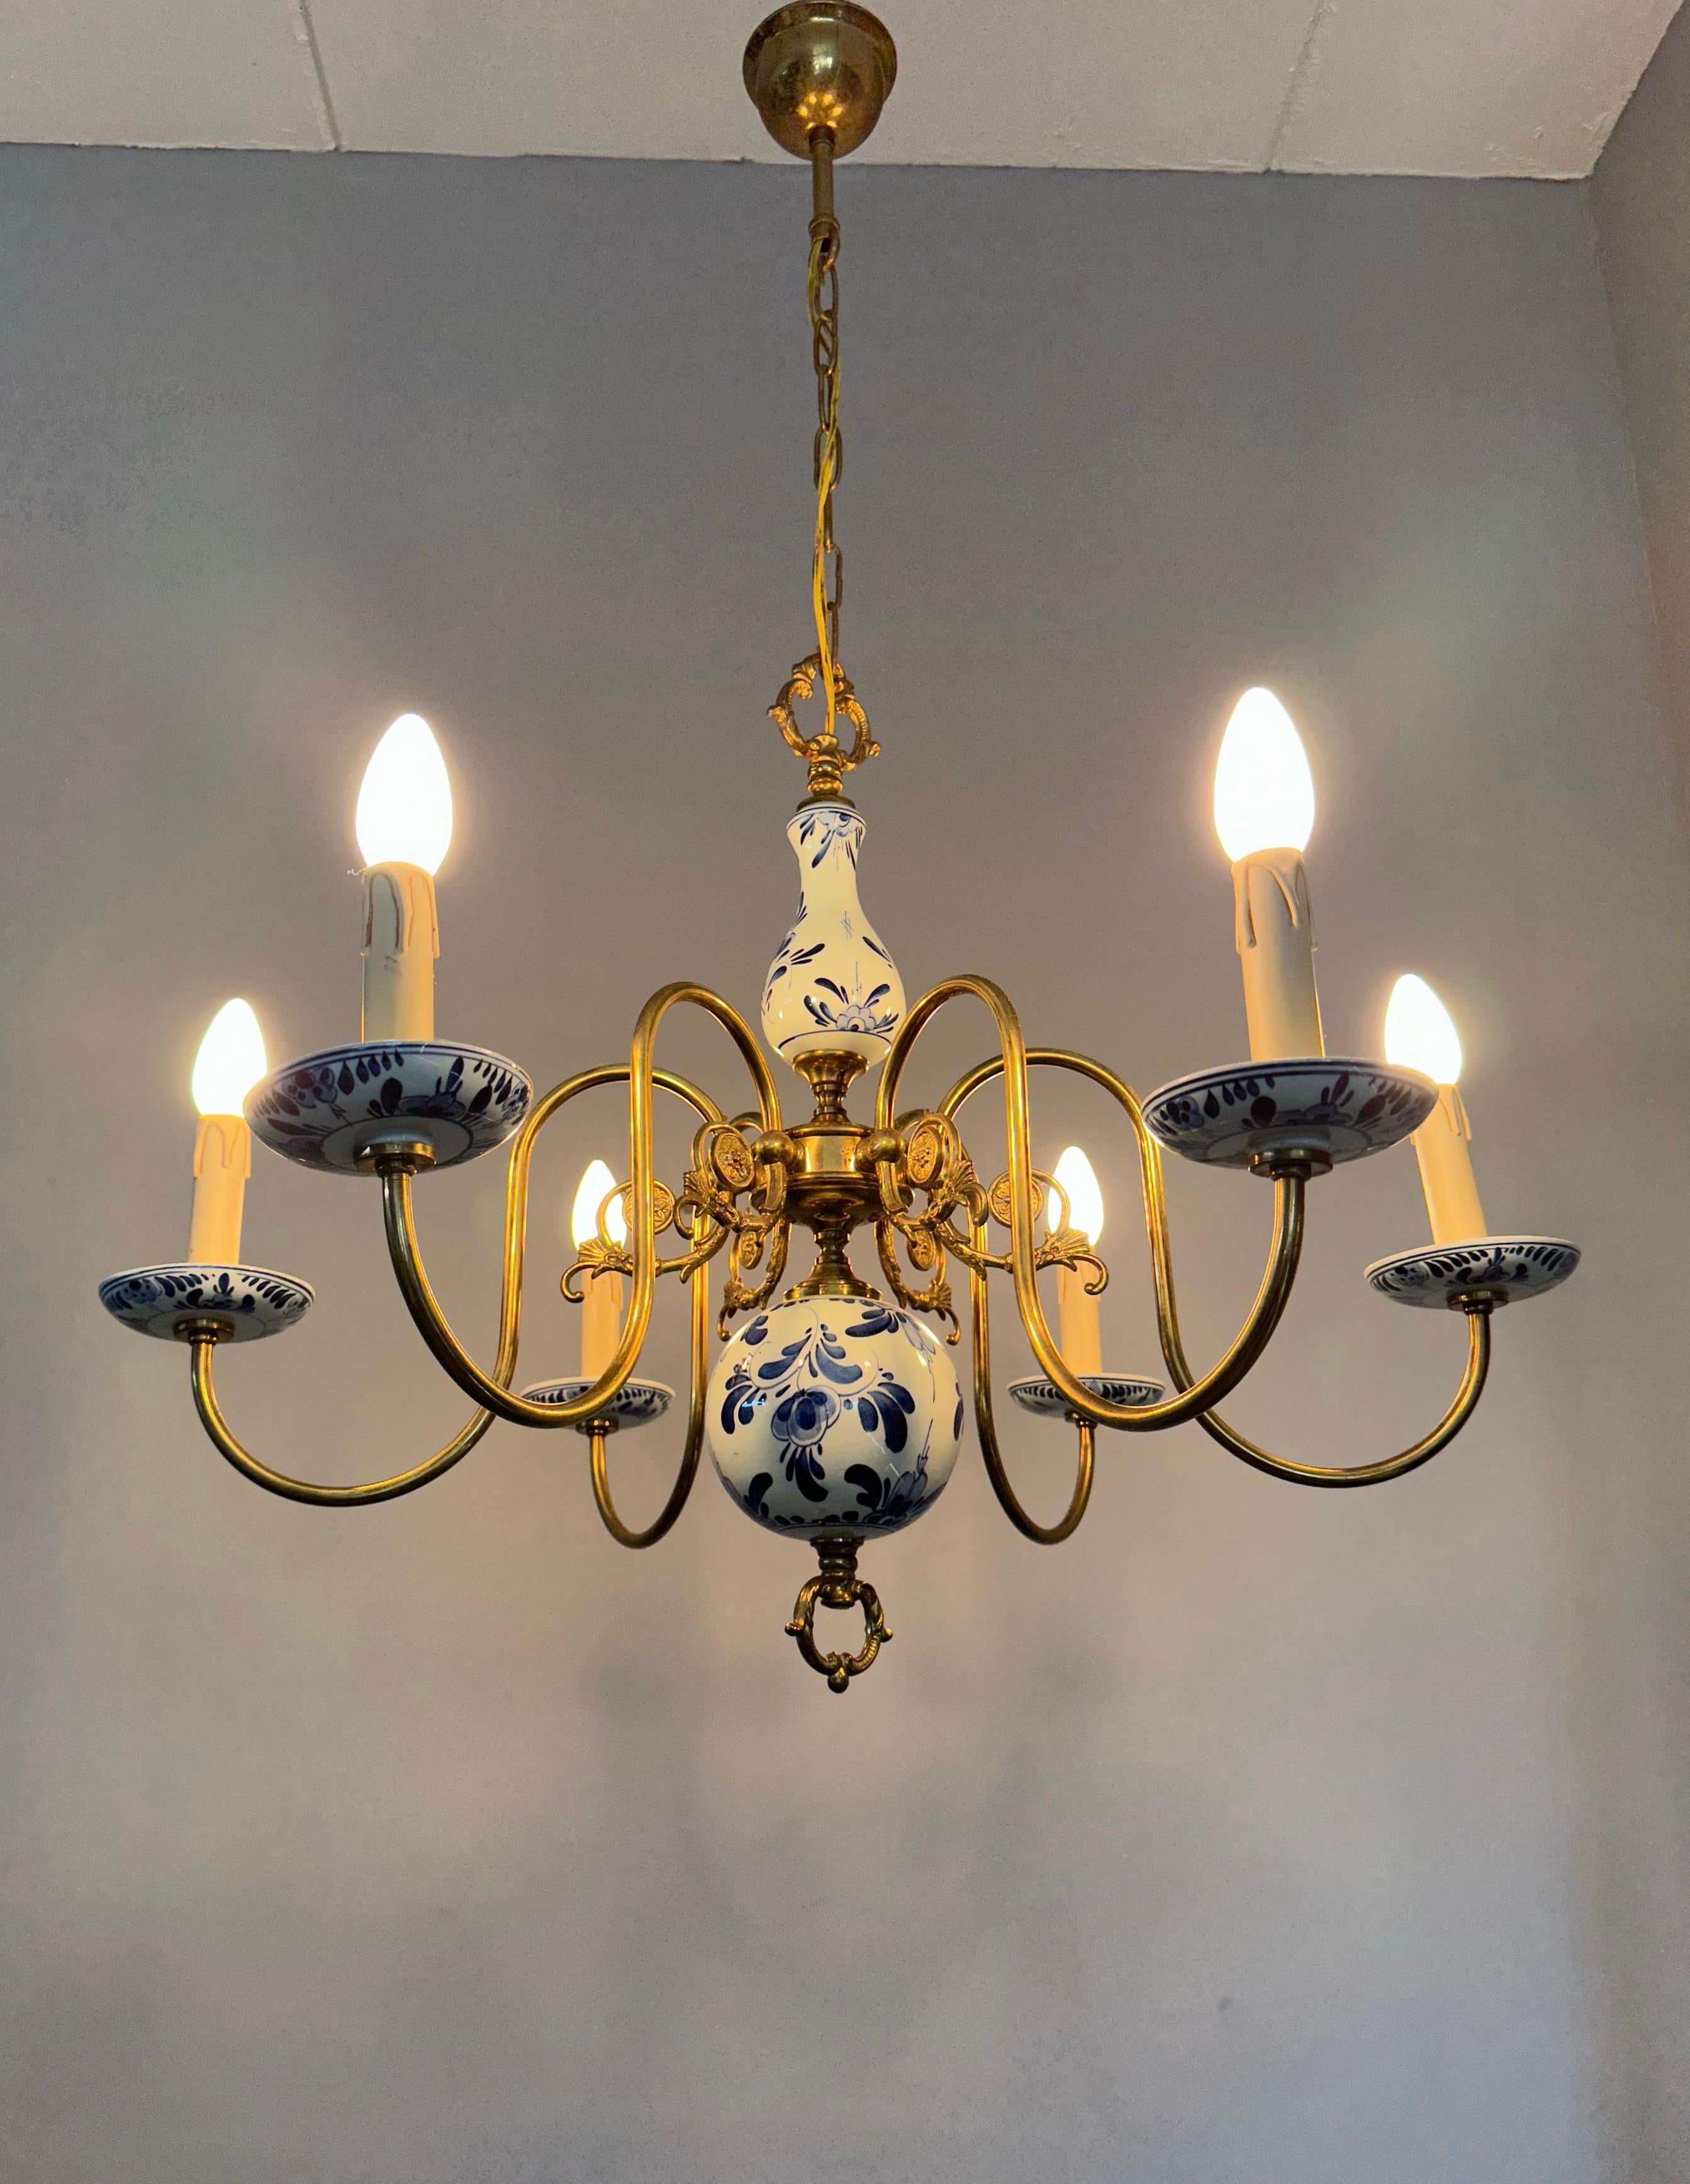 1940s Dutch Brass and Porcelain Hand Painted Delft Blue and White Chandelier For Sale 10